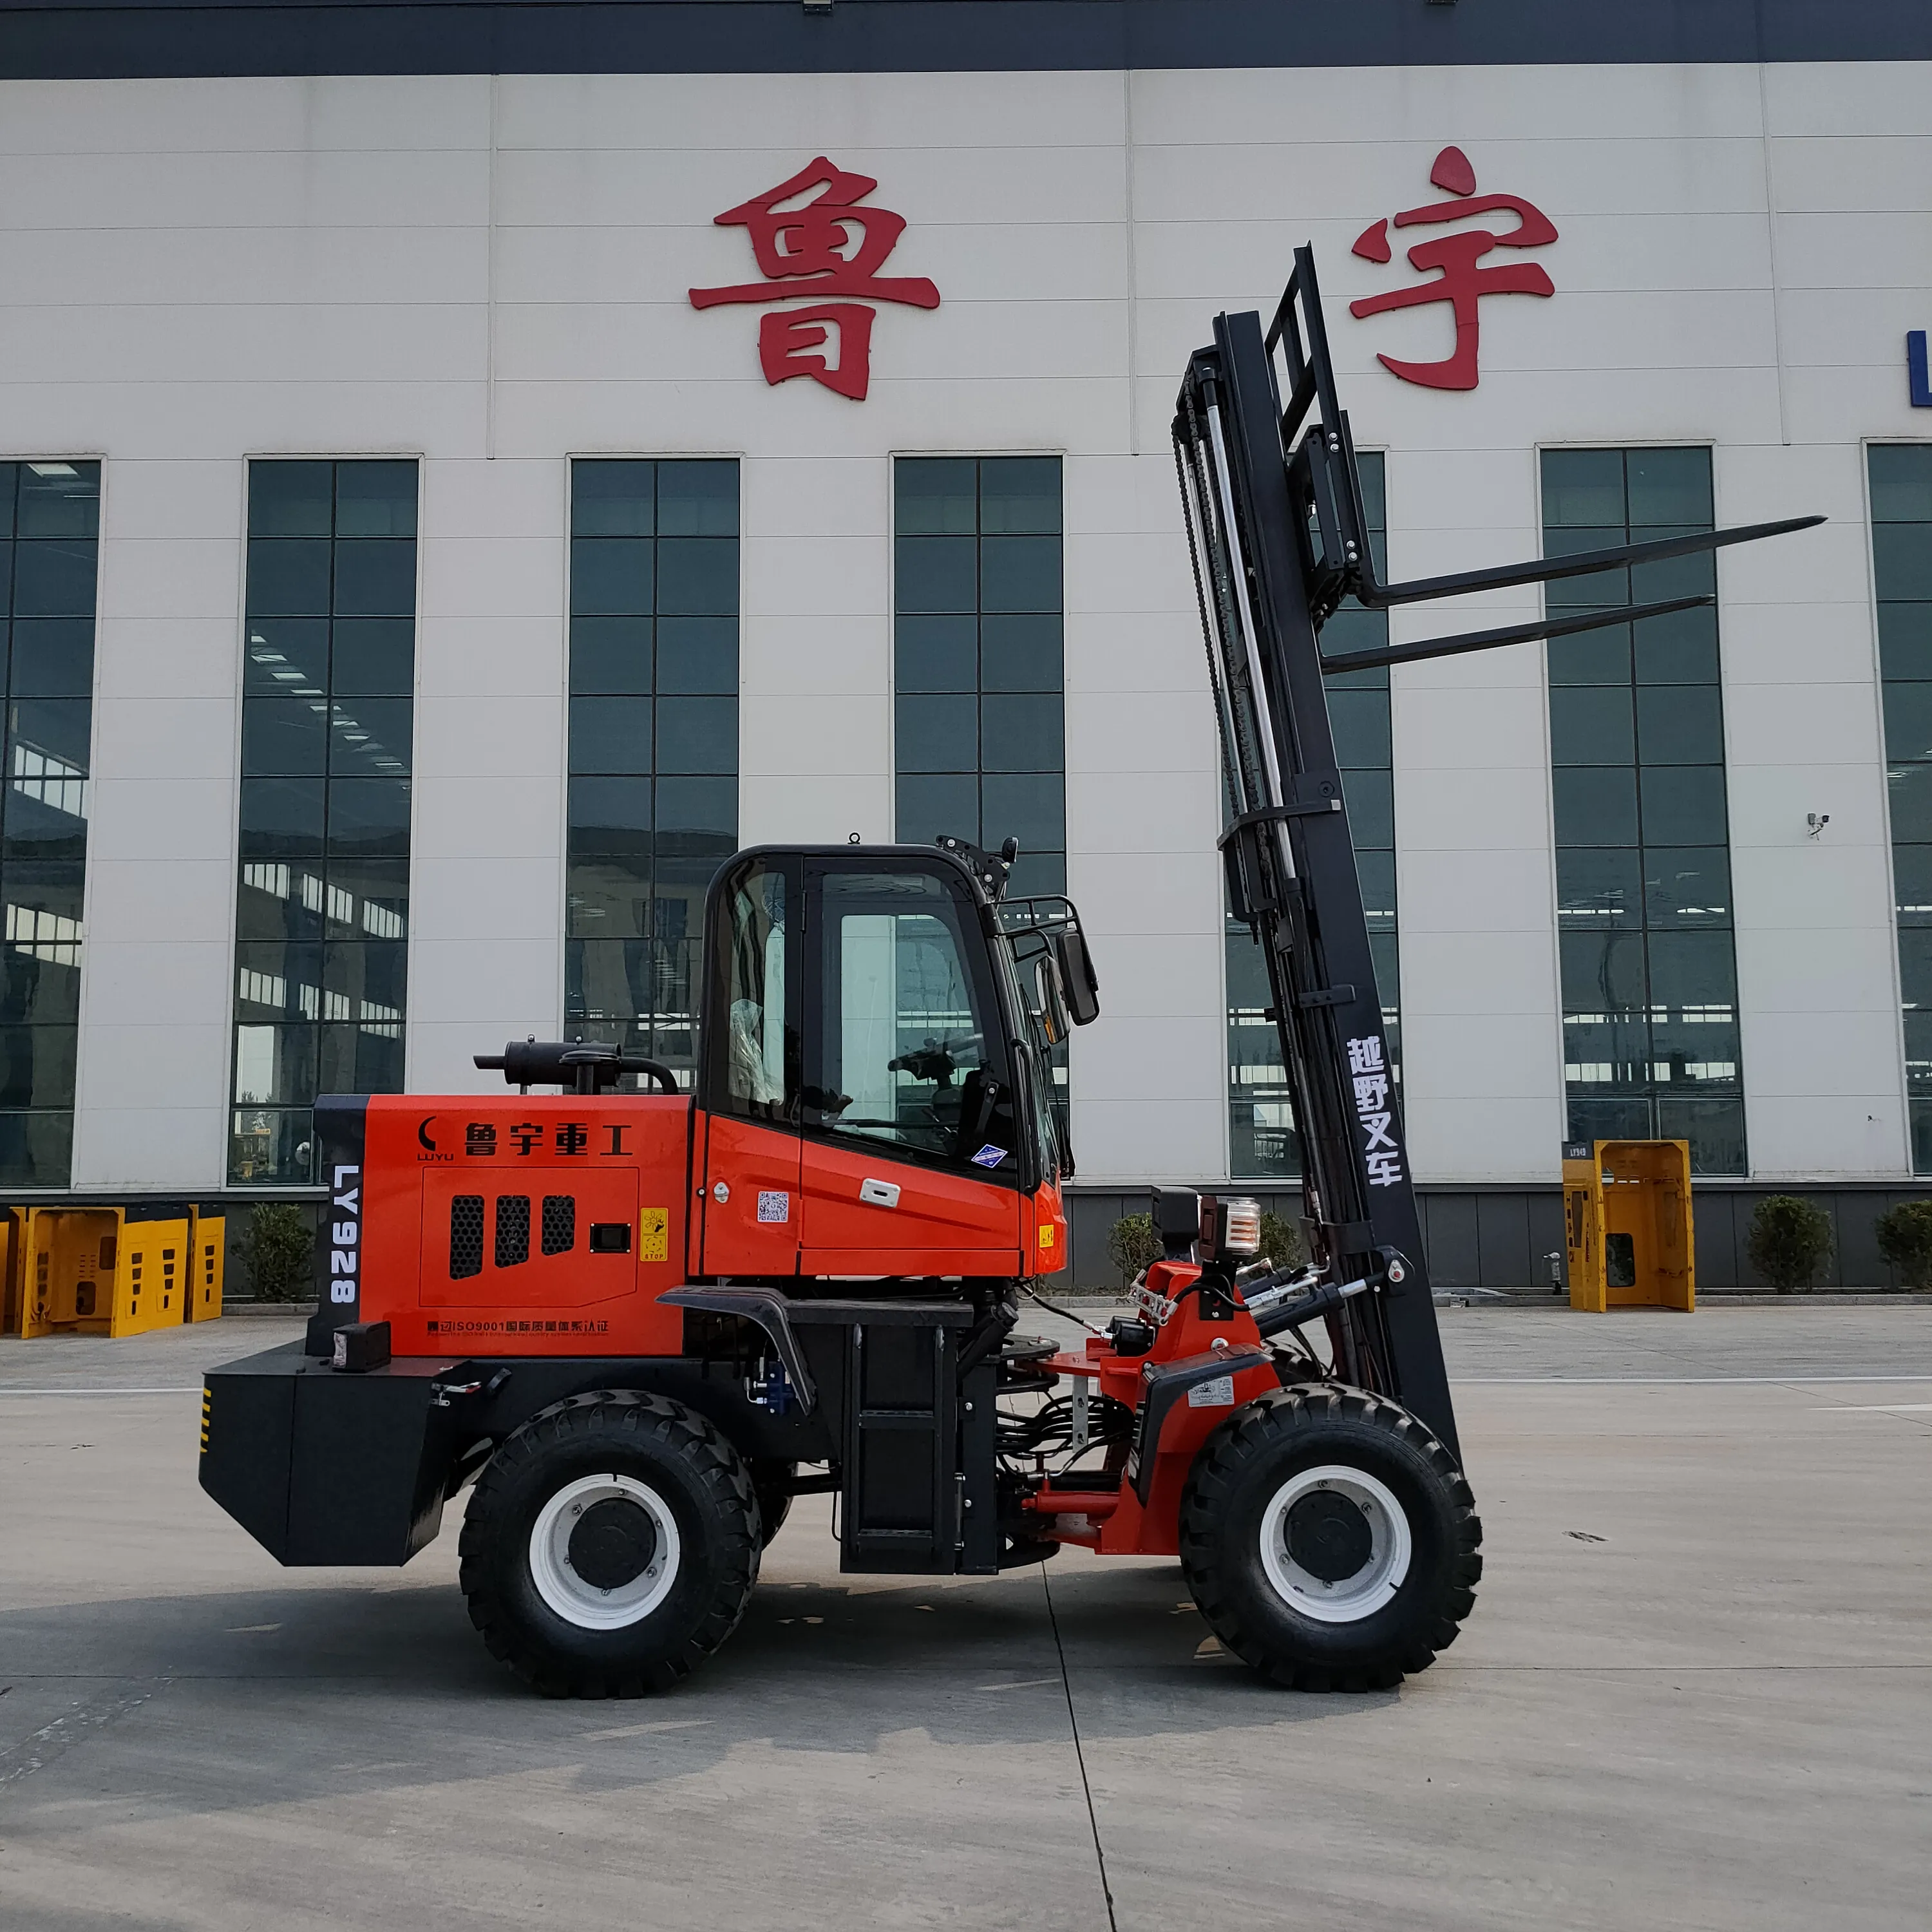 The advantages of off-road forklifts